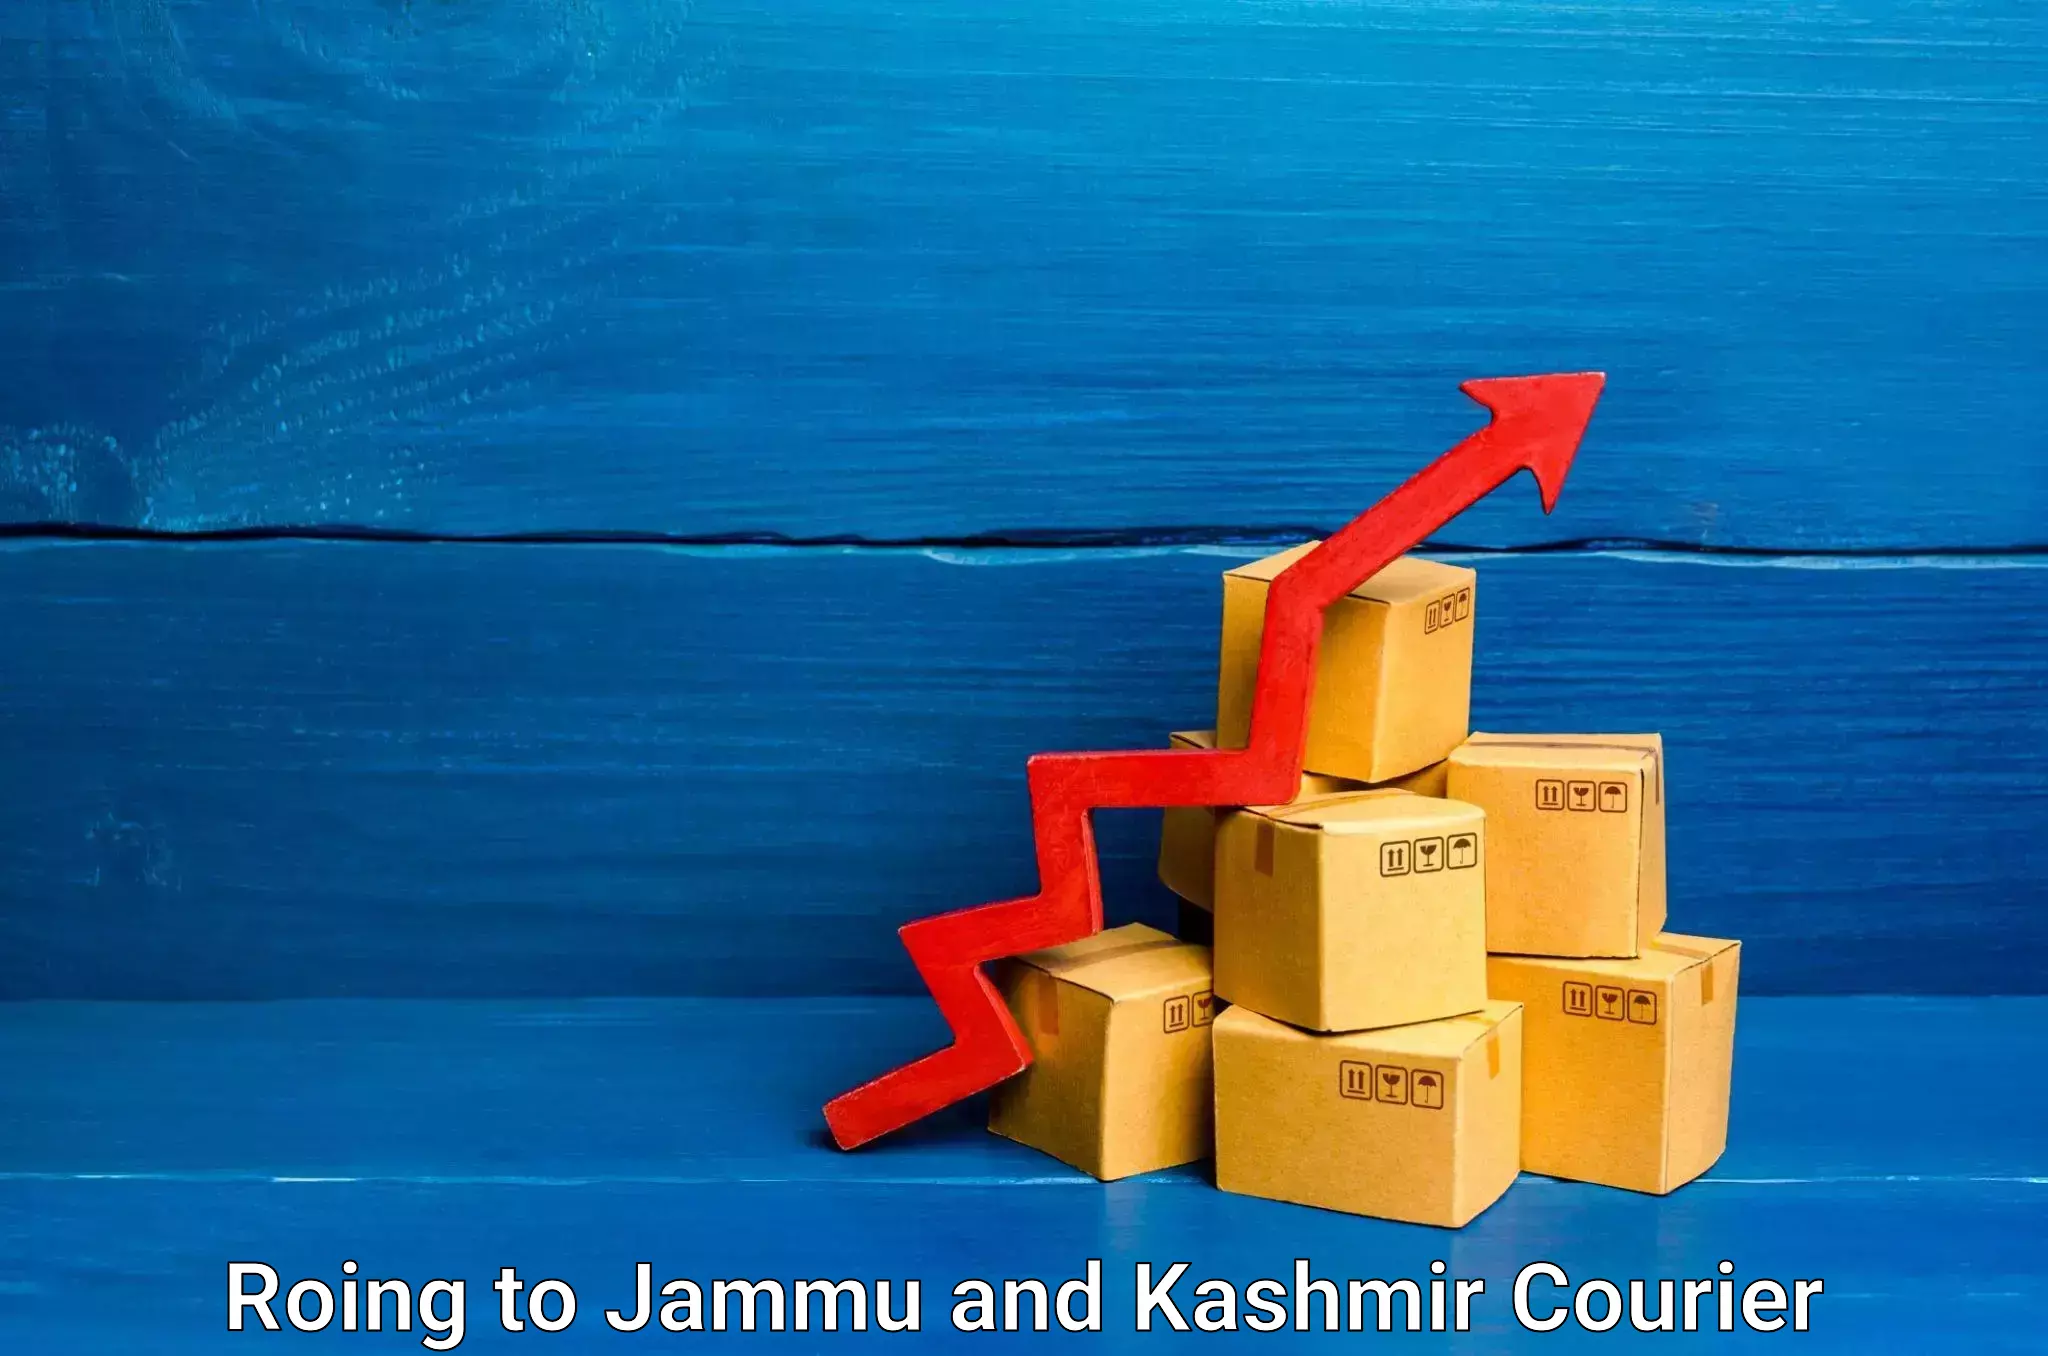 Nationwide shipping capabilities Roing to Jammu and Kashmir